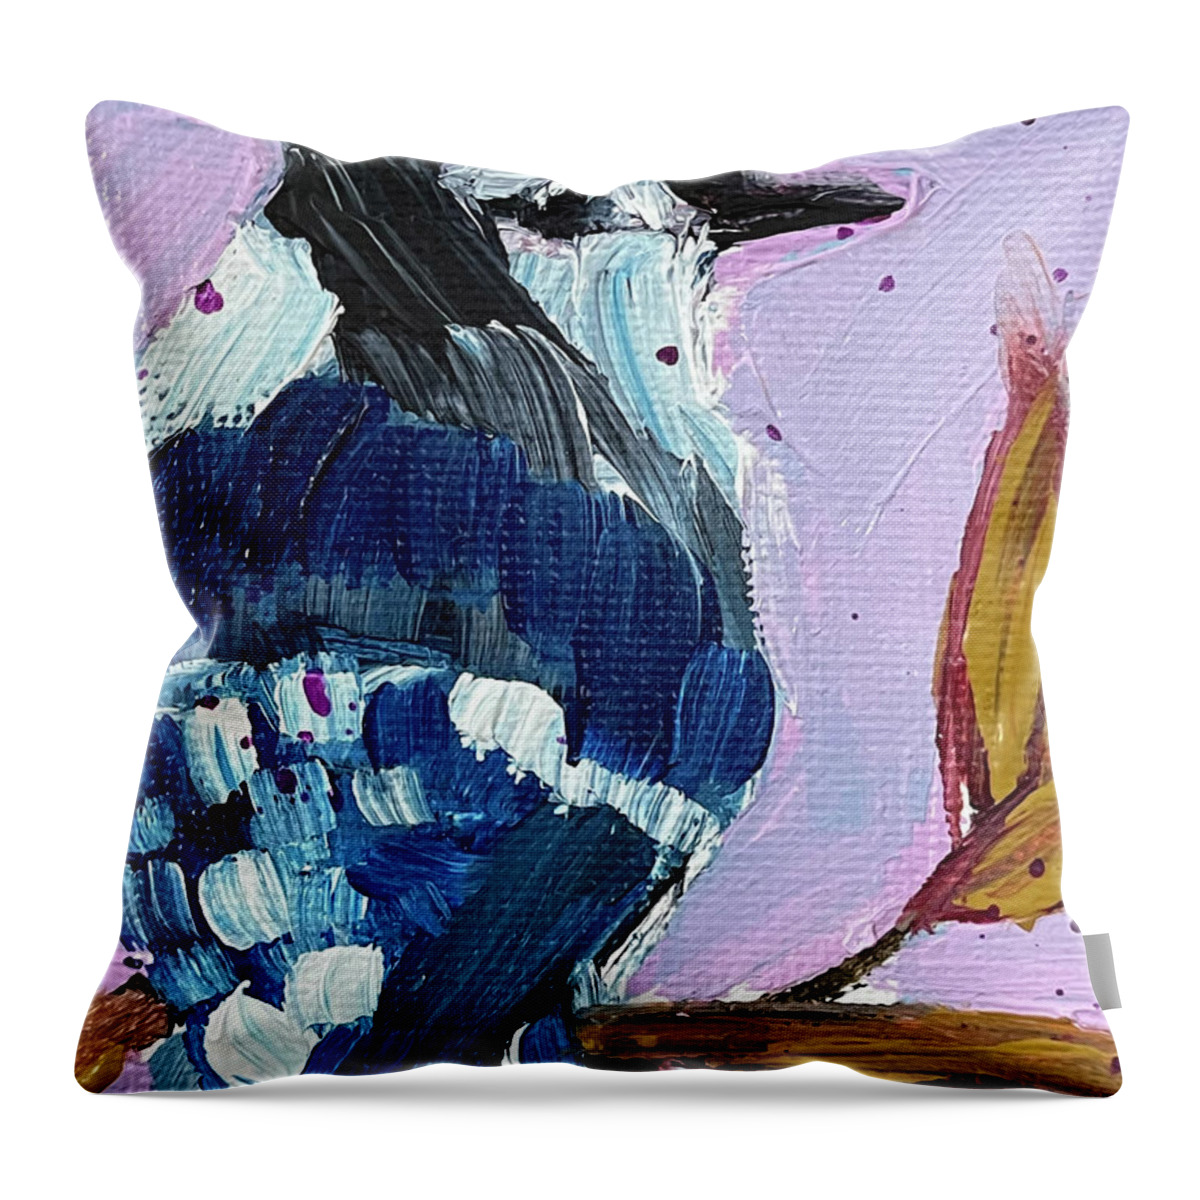 Bluejay Throw Pillow featuring the painting Bluejay by Roxy Rich